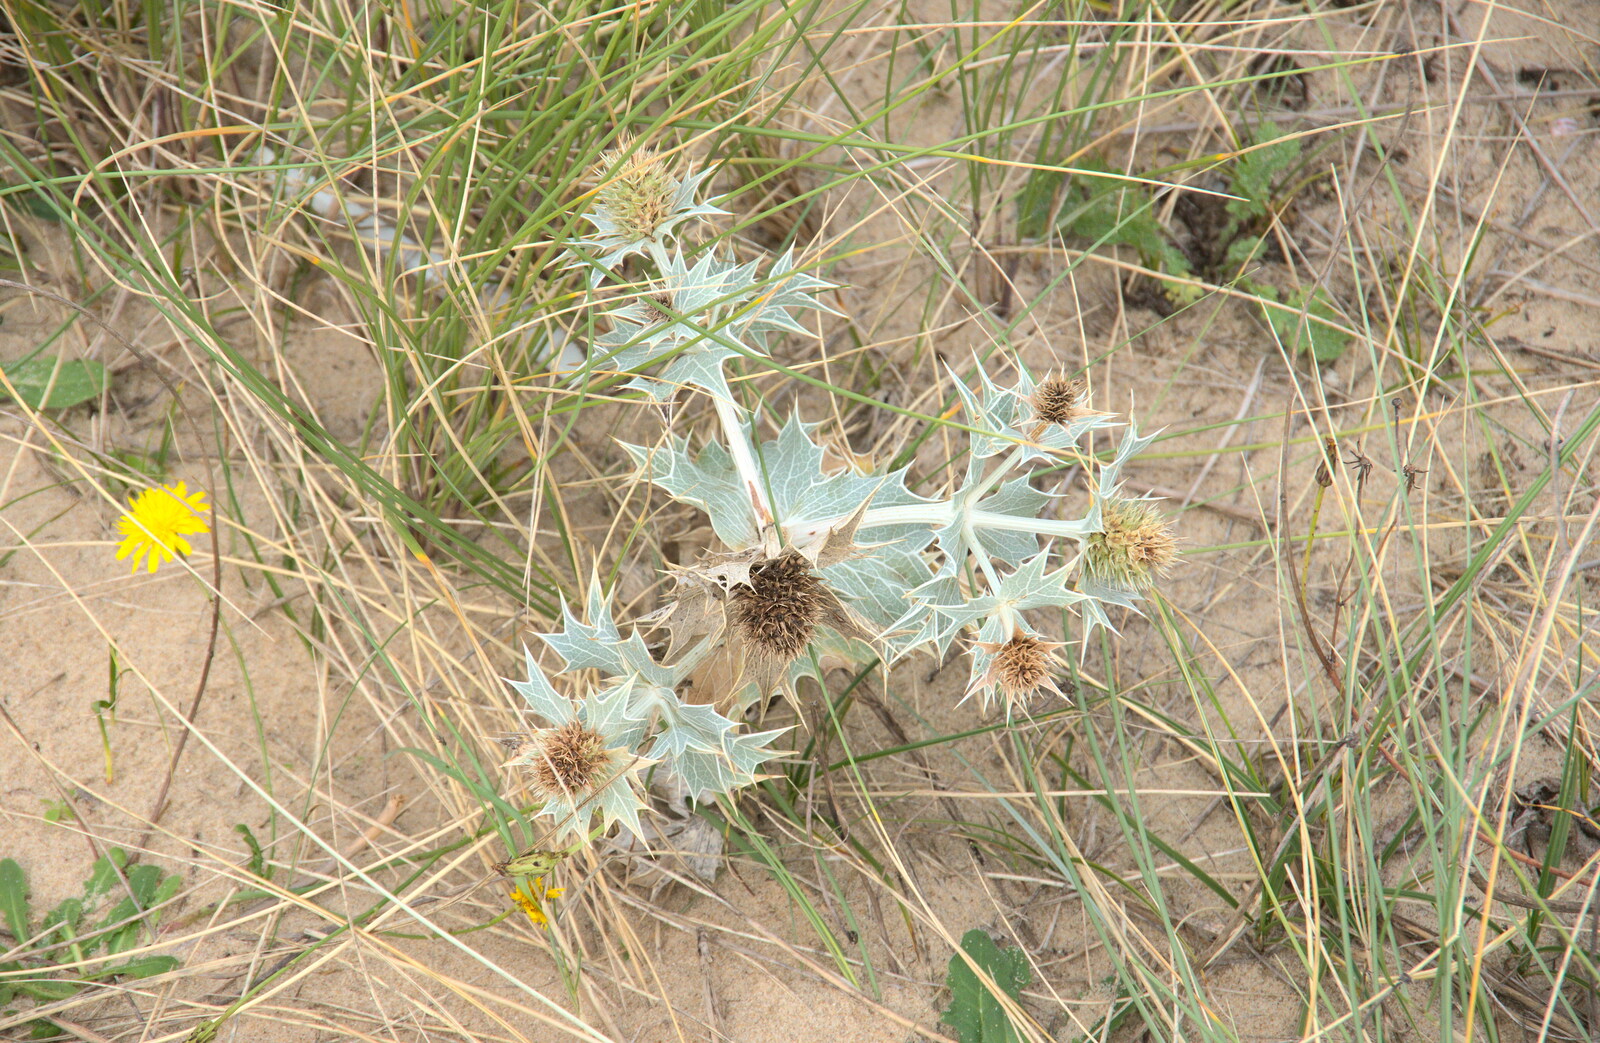 Sea thistle from An Optimistic Camping Weekend, Waxham Sands, Norfolk - 22nd September 2018